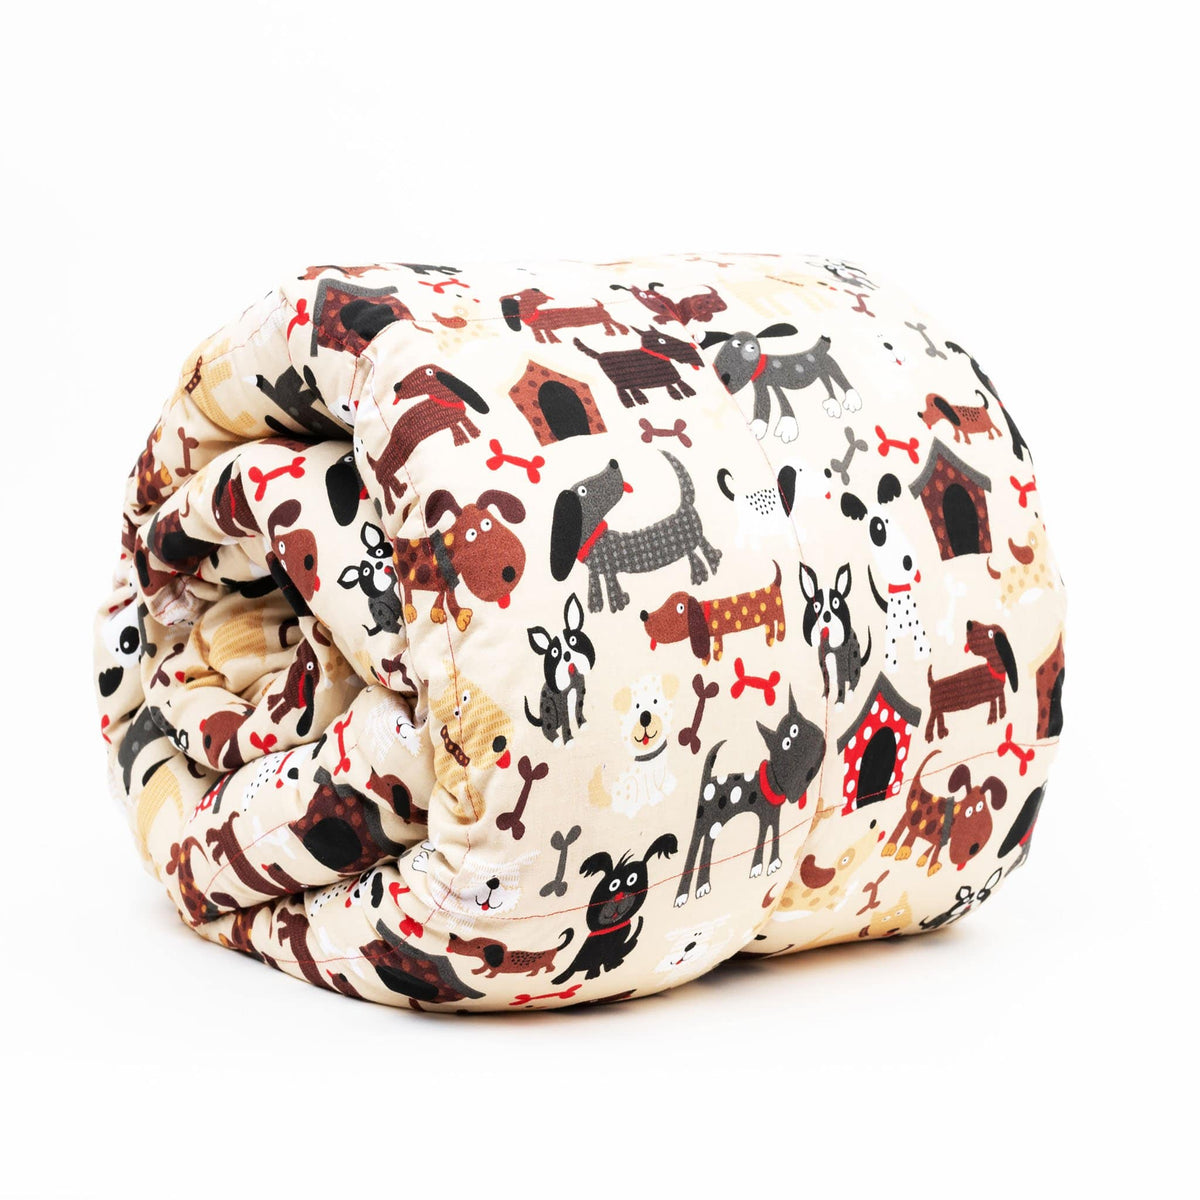 Mosaic Weighted Blankets Hot Dog Weighted Blanket